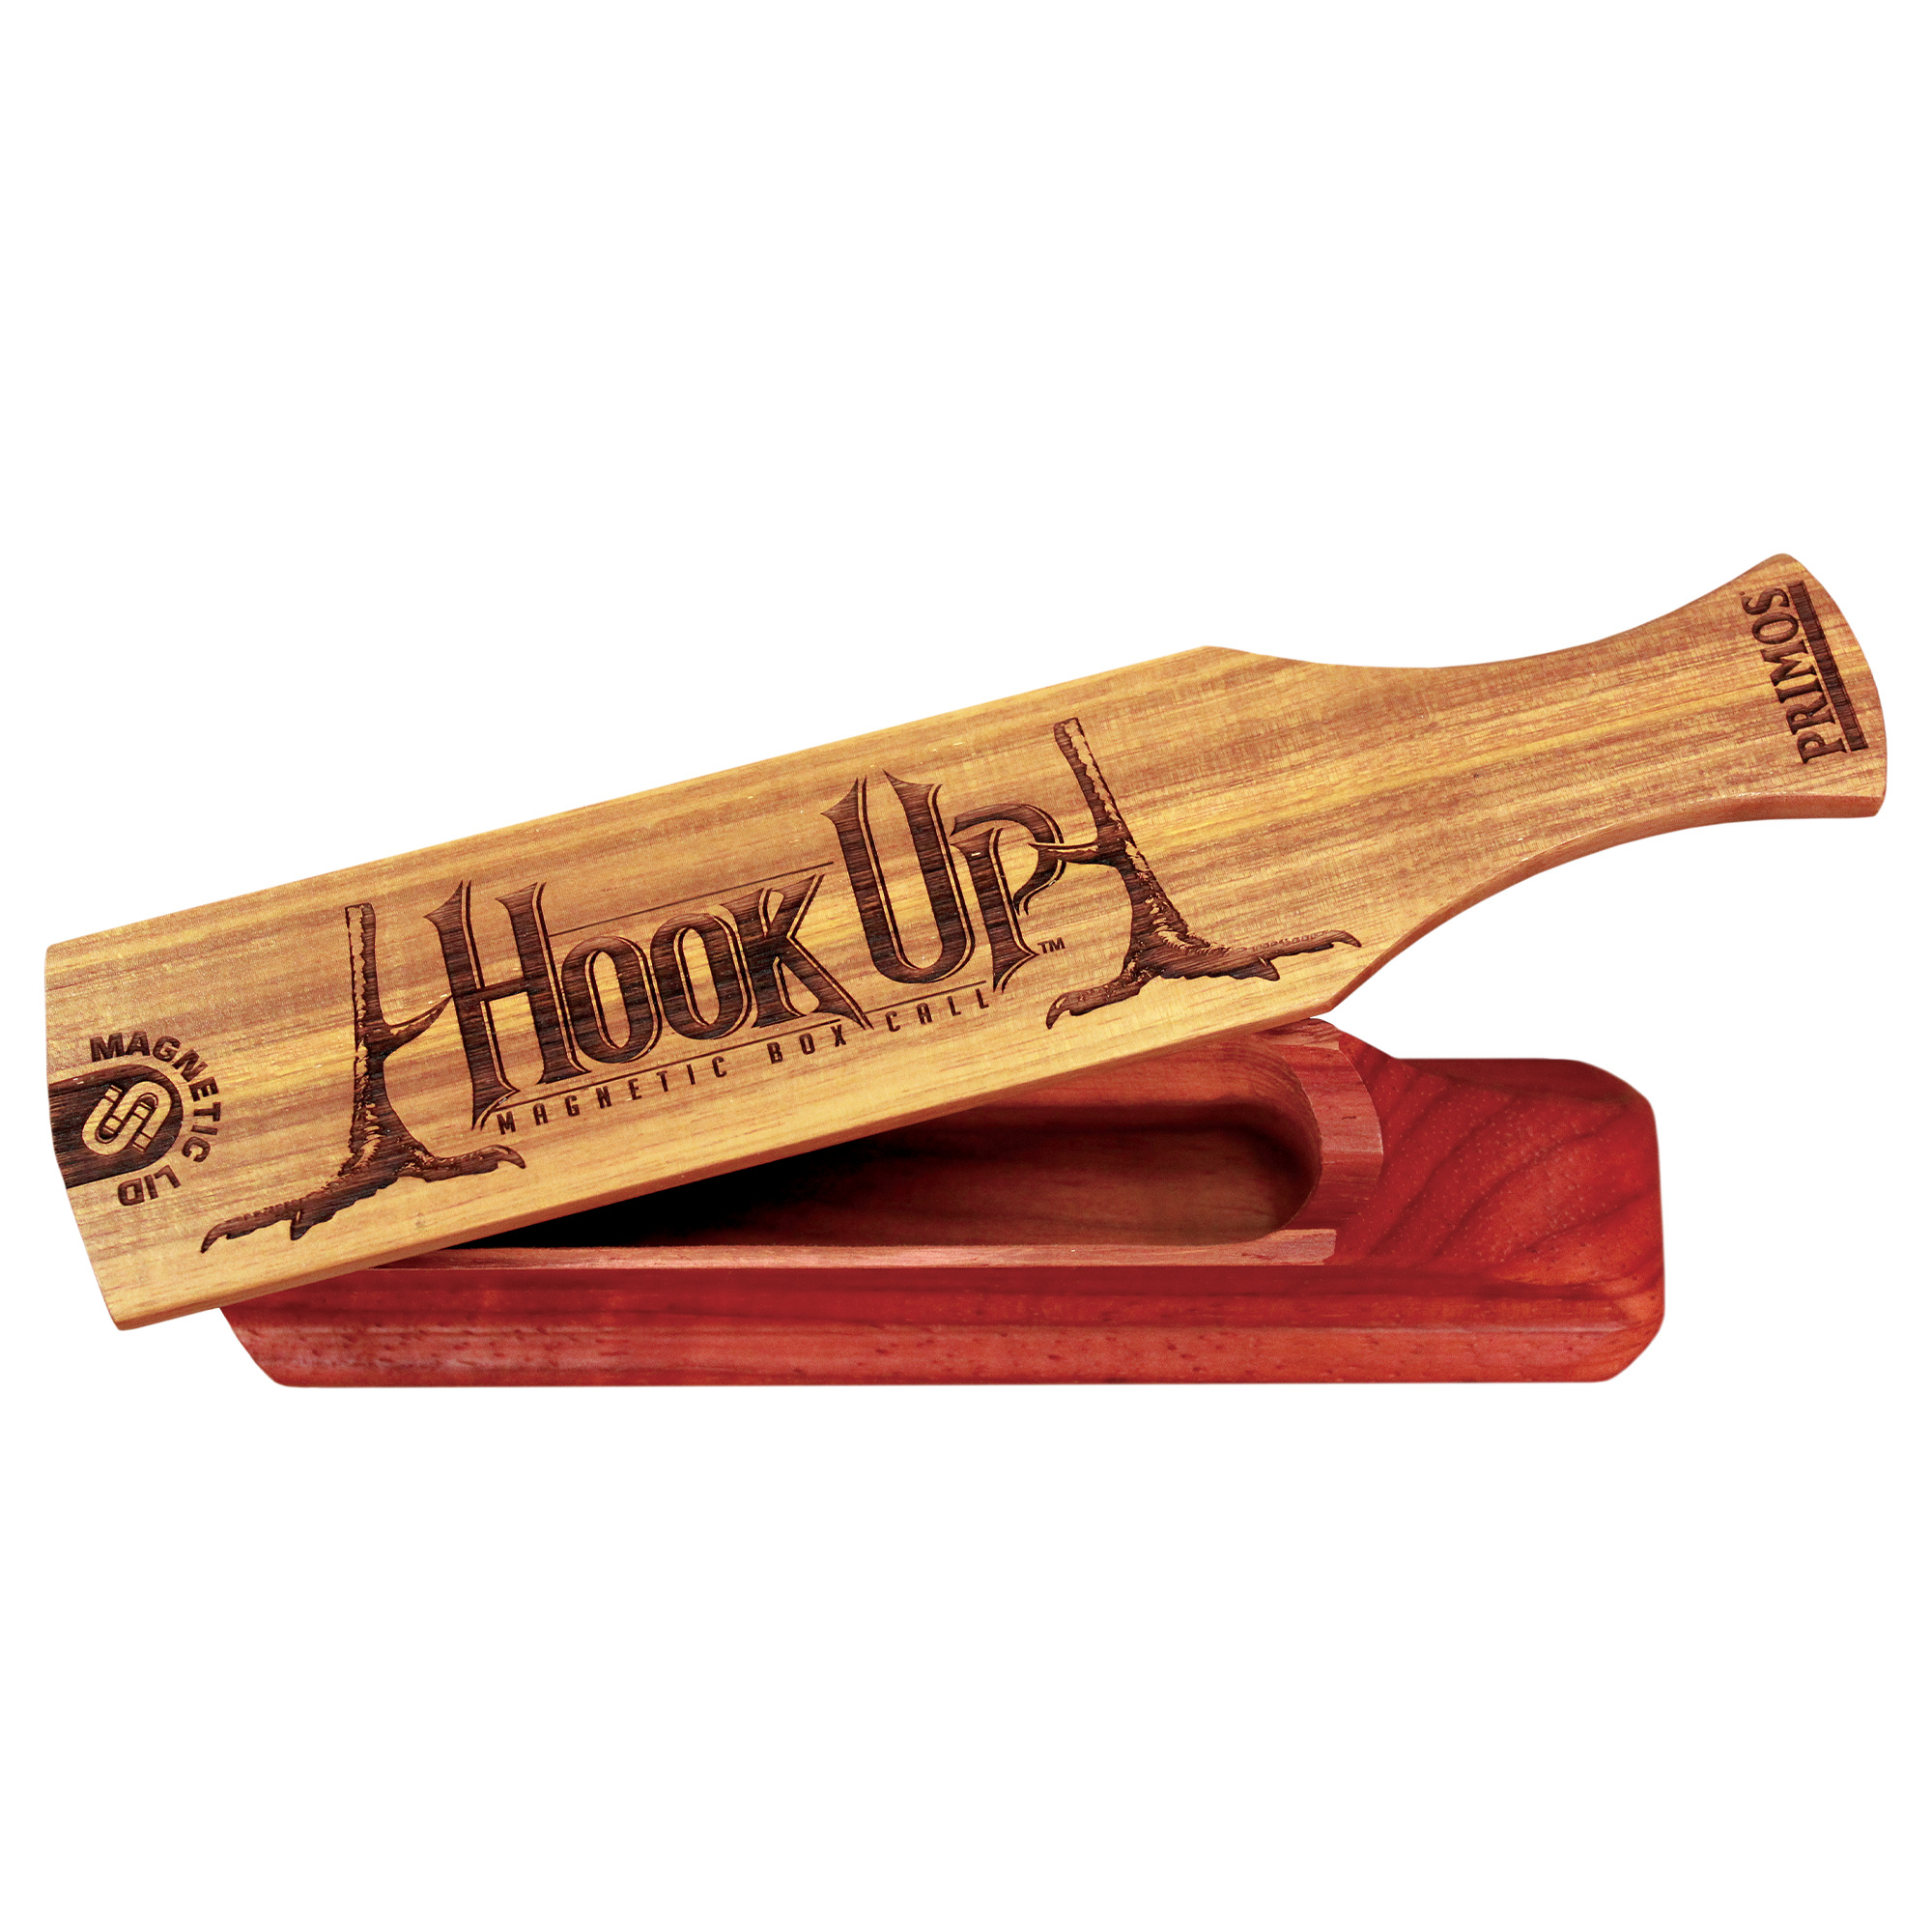 Primos Hunting 278 Lil Hook up Turkey Call for sale online 